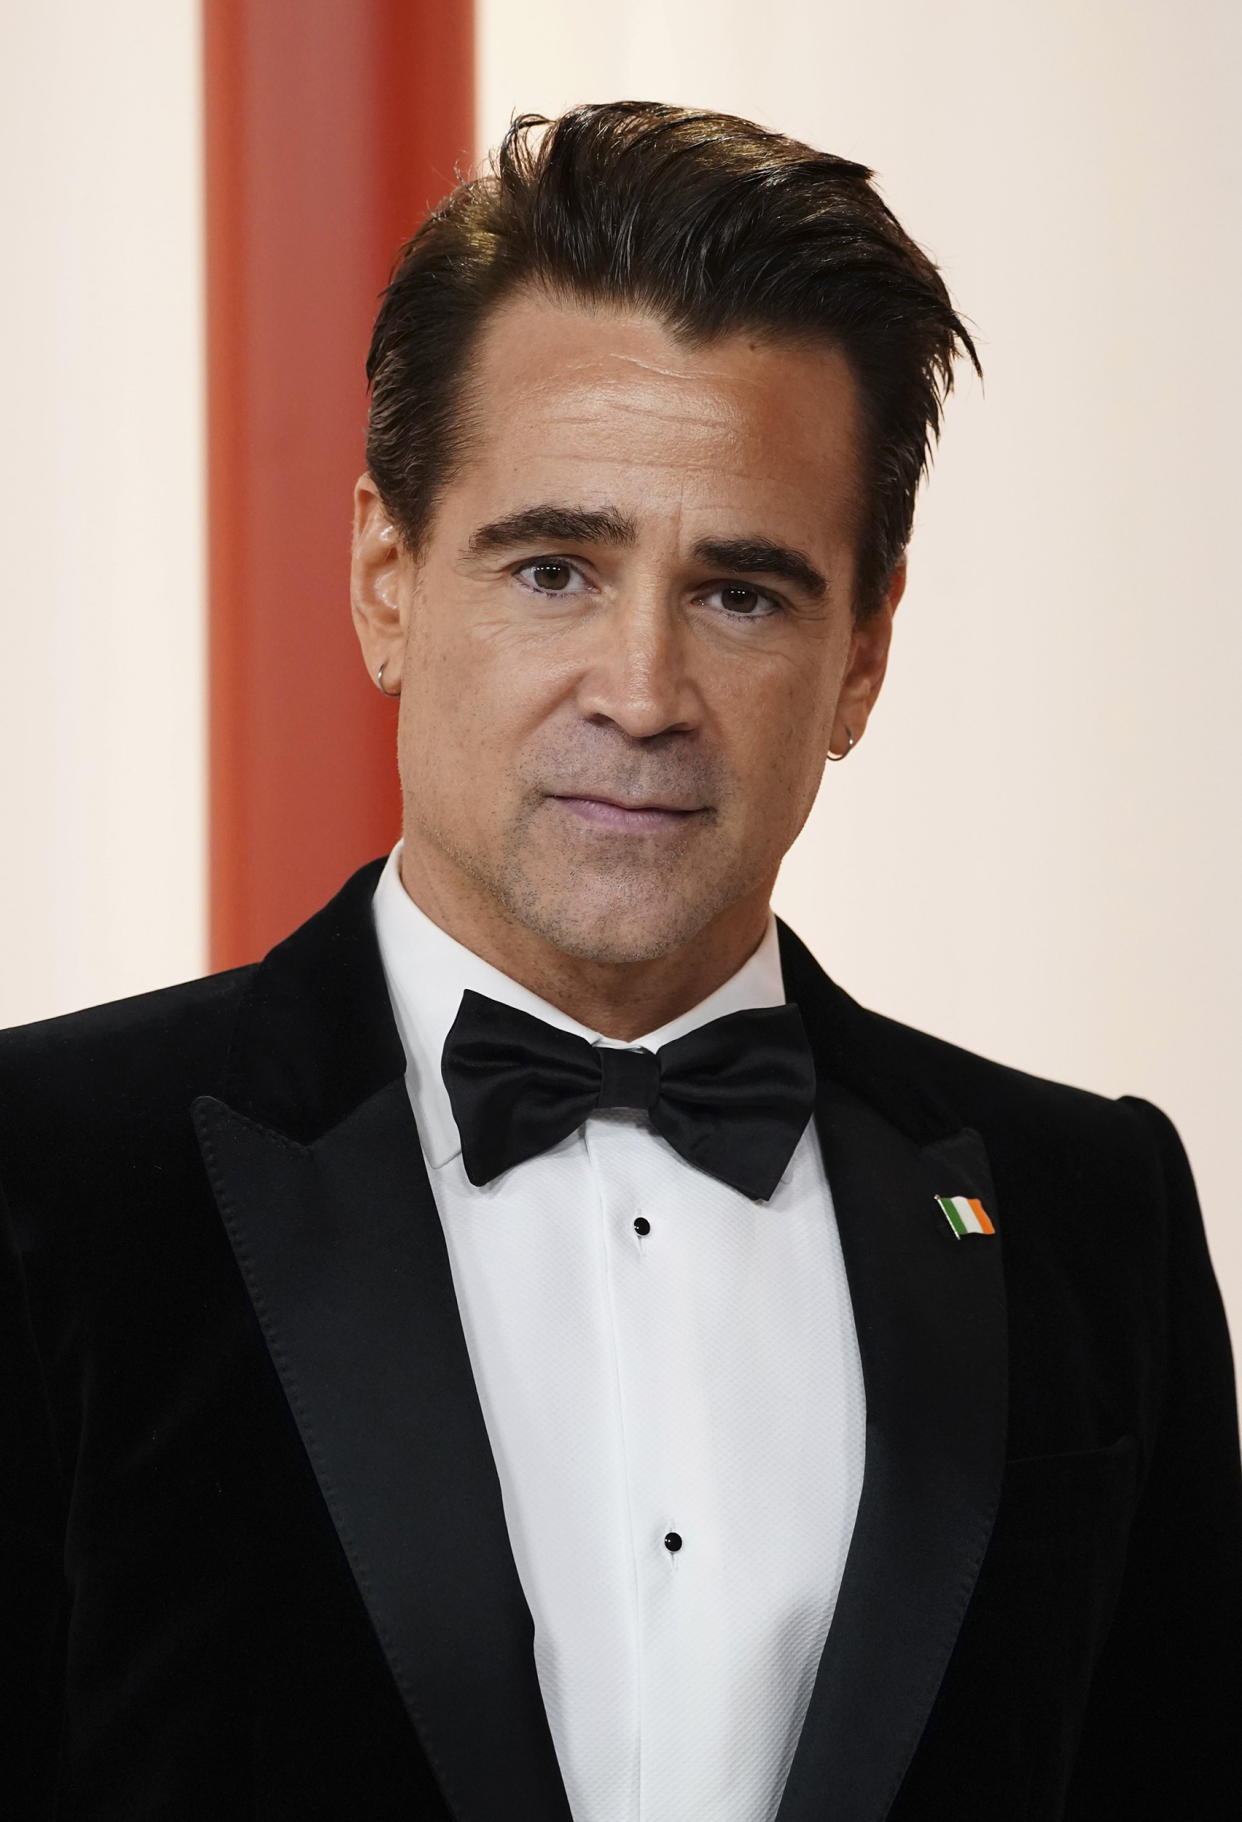 Colin Farrell arrives at the Oscars on March 12, 2023 in Los Angeles, CA. (Jordan Strauss / AP)